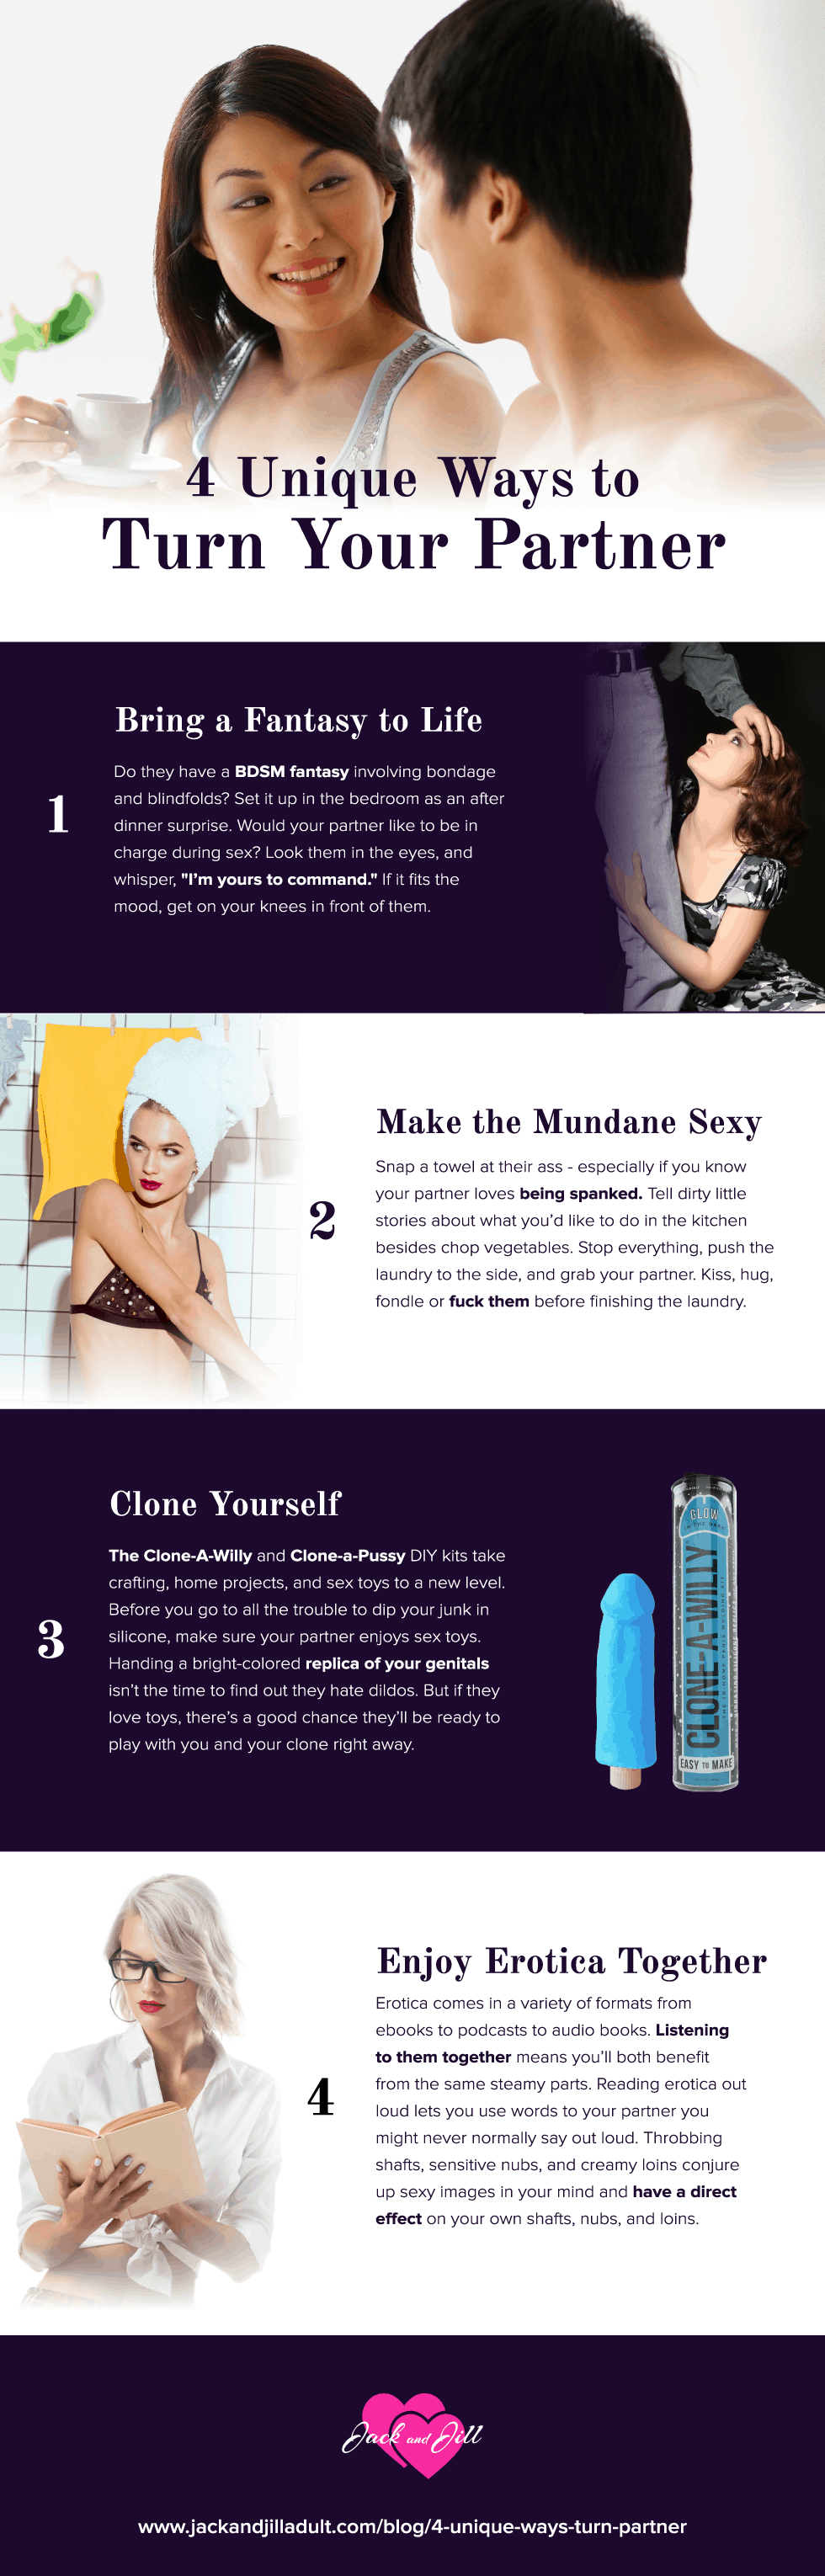 Infographic for 4 Unique Ways to Turn Your Partner On